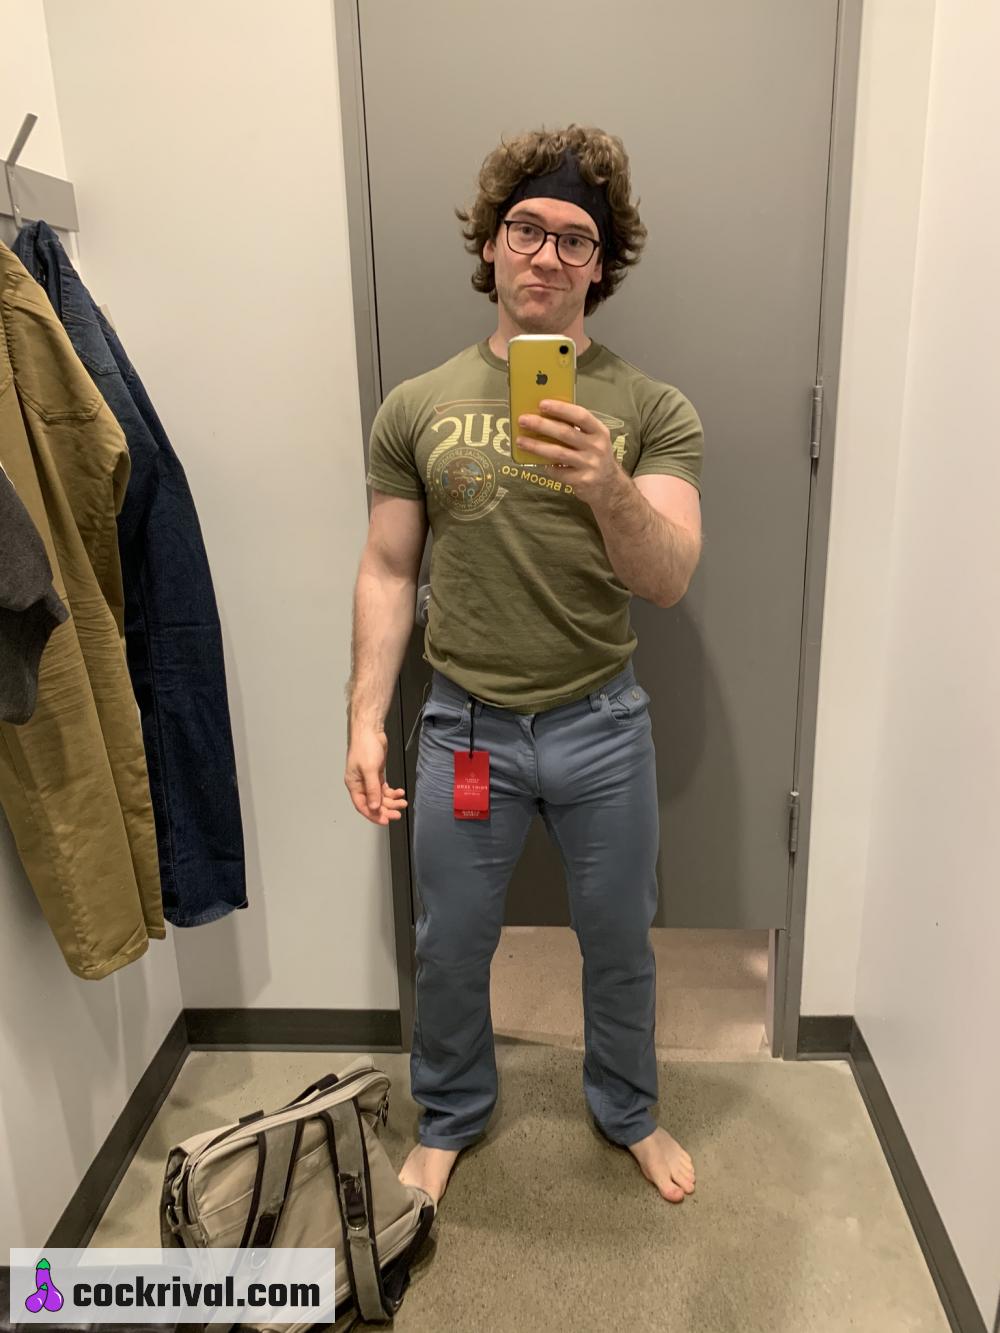 Do these pants make my dick look fat?